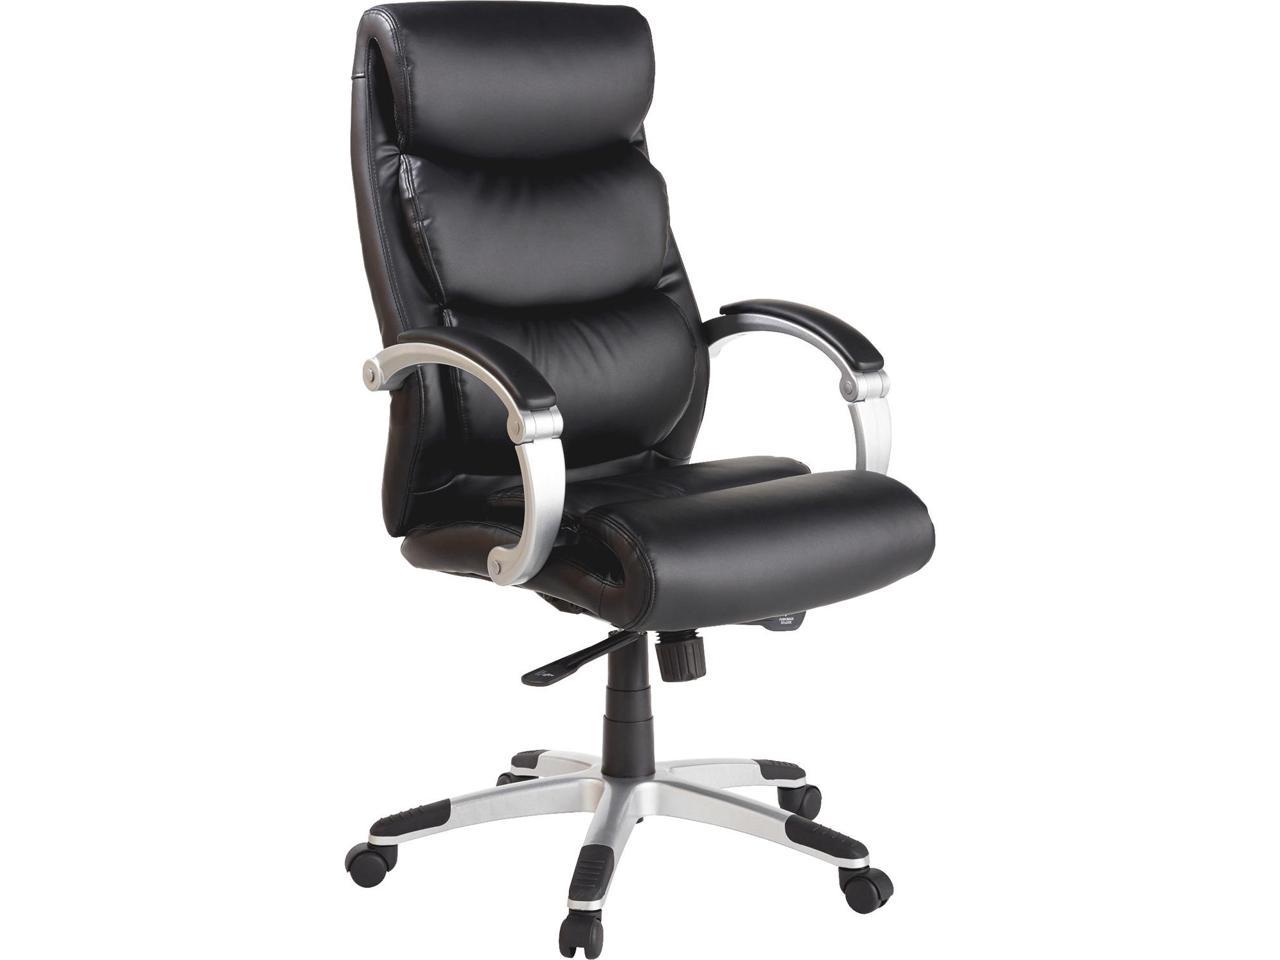 Lorell Exec High-Back Chair Leather Flex Arms 27"x30"x46-1/2" BK 60620 - image 1 of 19